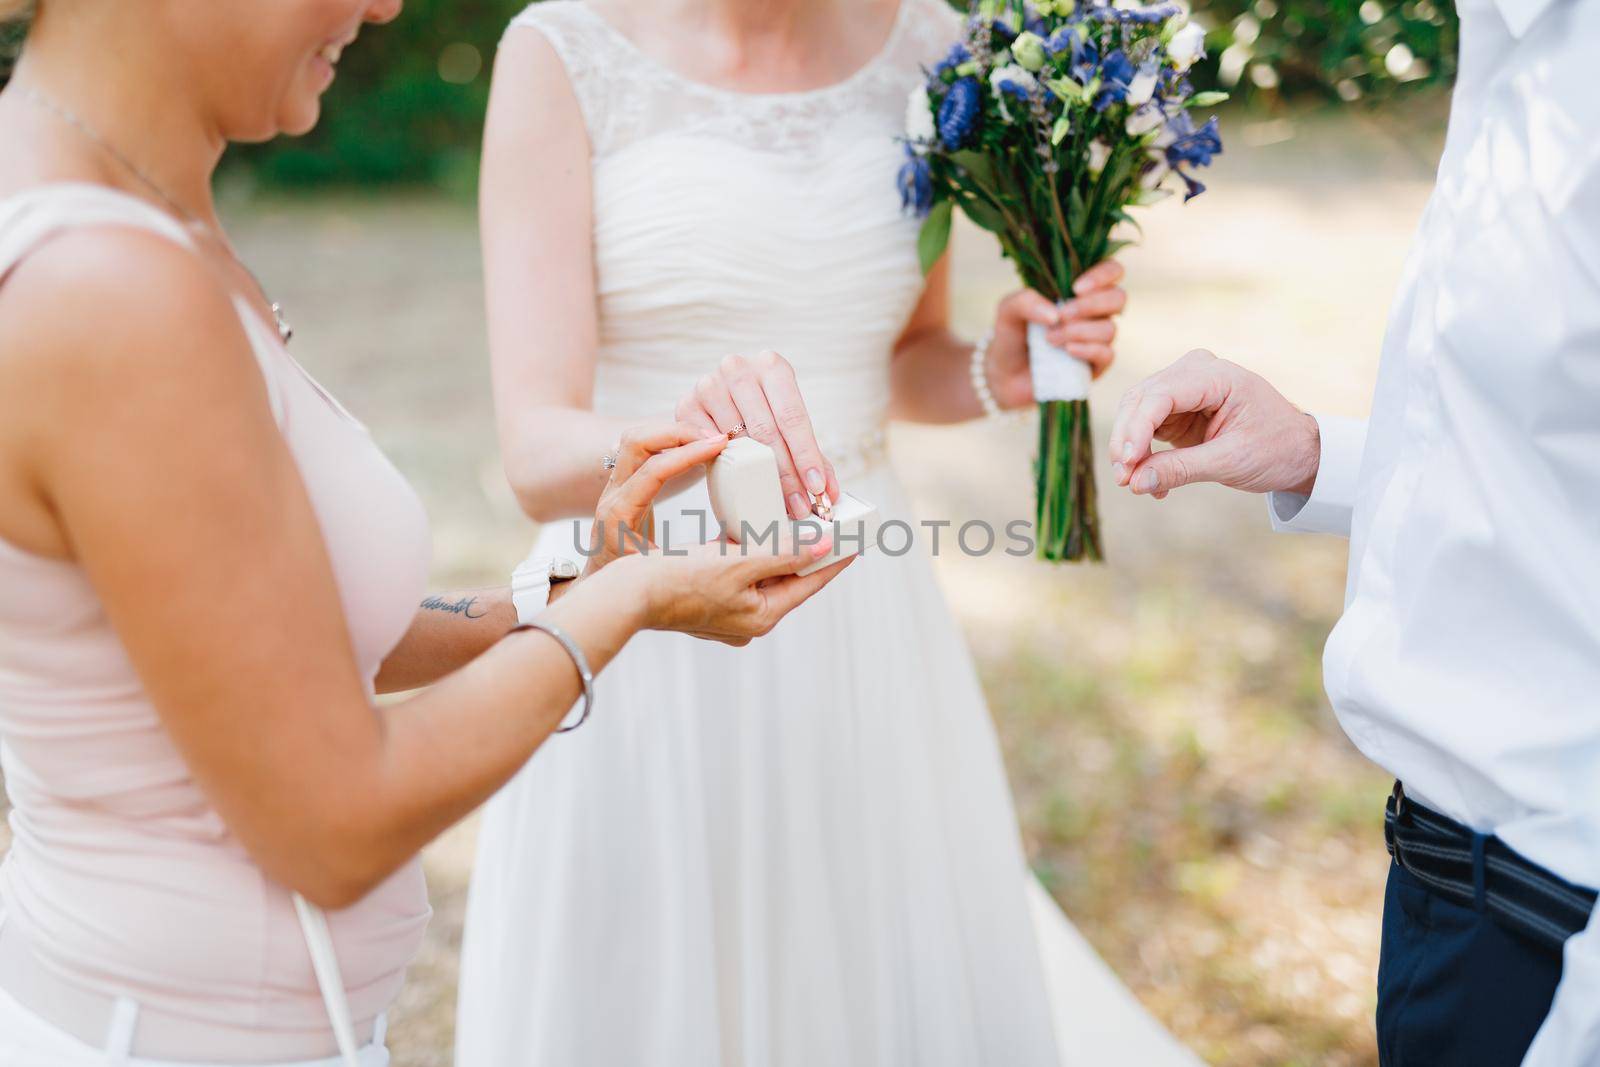 The bride takes a wedding ring from the box held by the bridesmaid to put it on the groom's finger by Nadtochiy